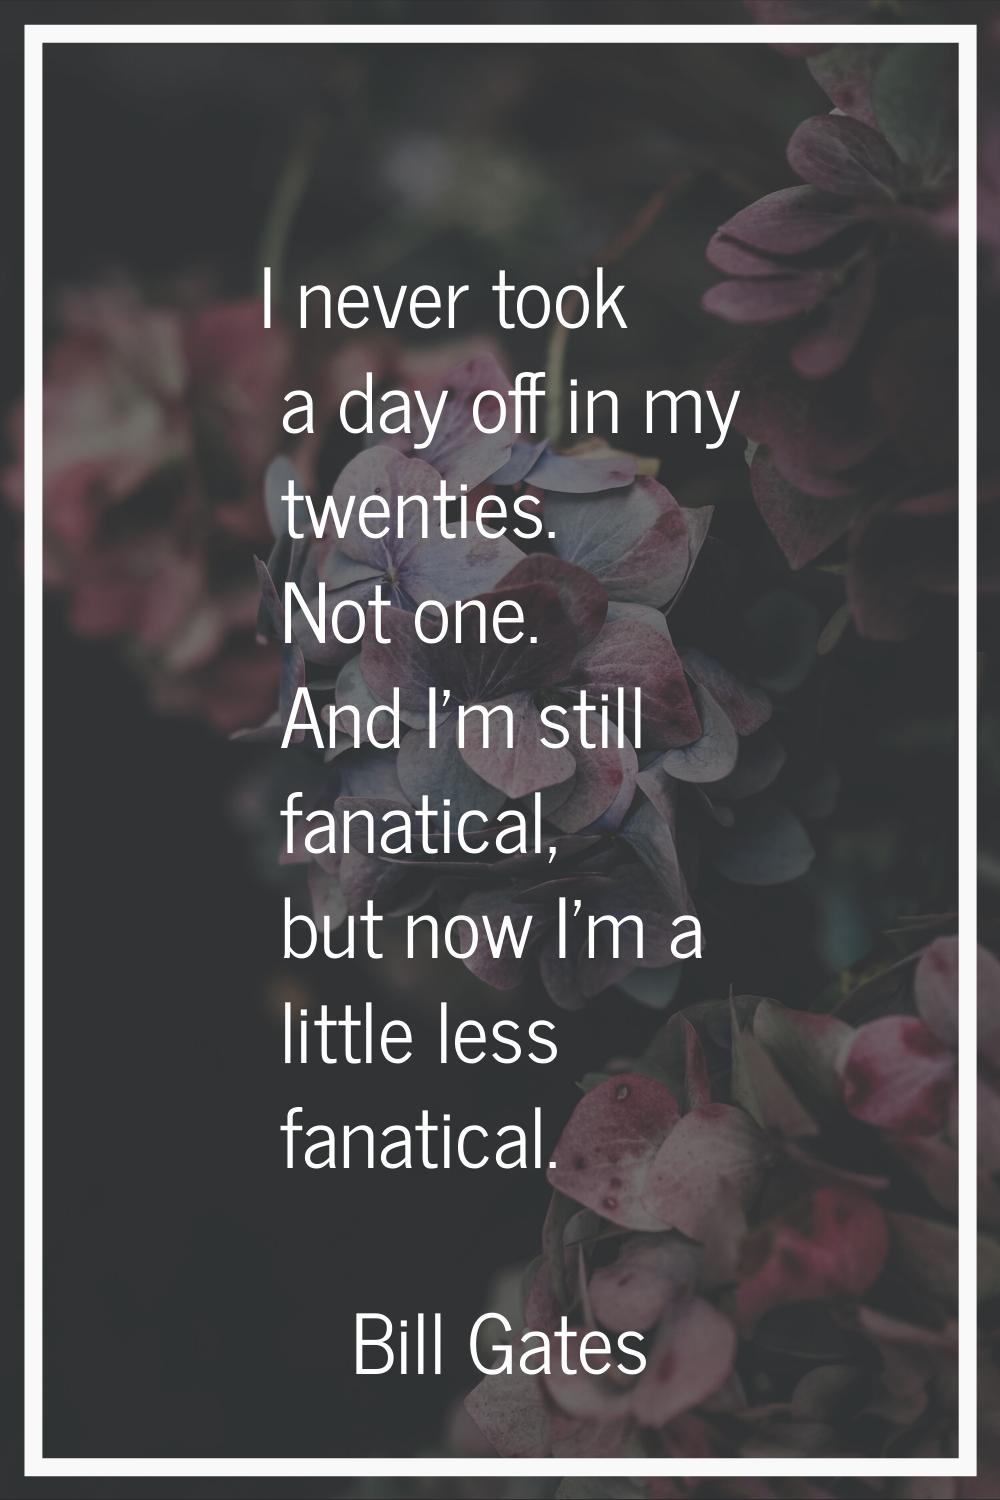 I never took a day off in my twenties. Not one. And I'm still fanatical, but now I'm a little less 